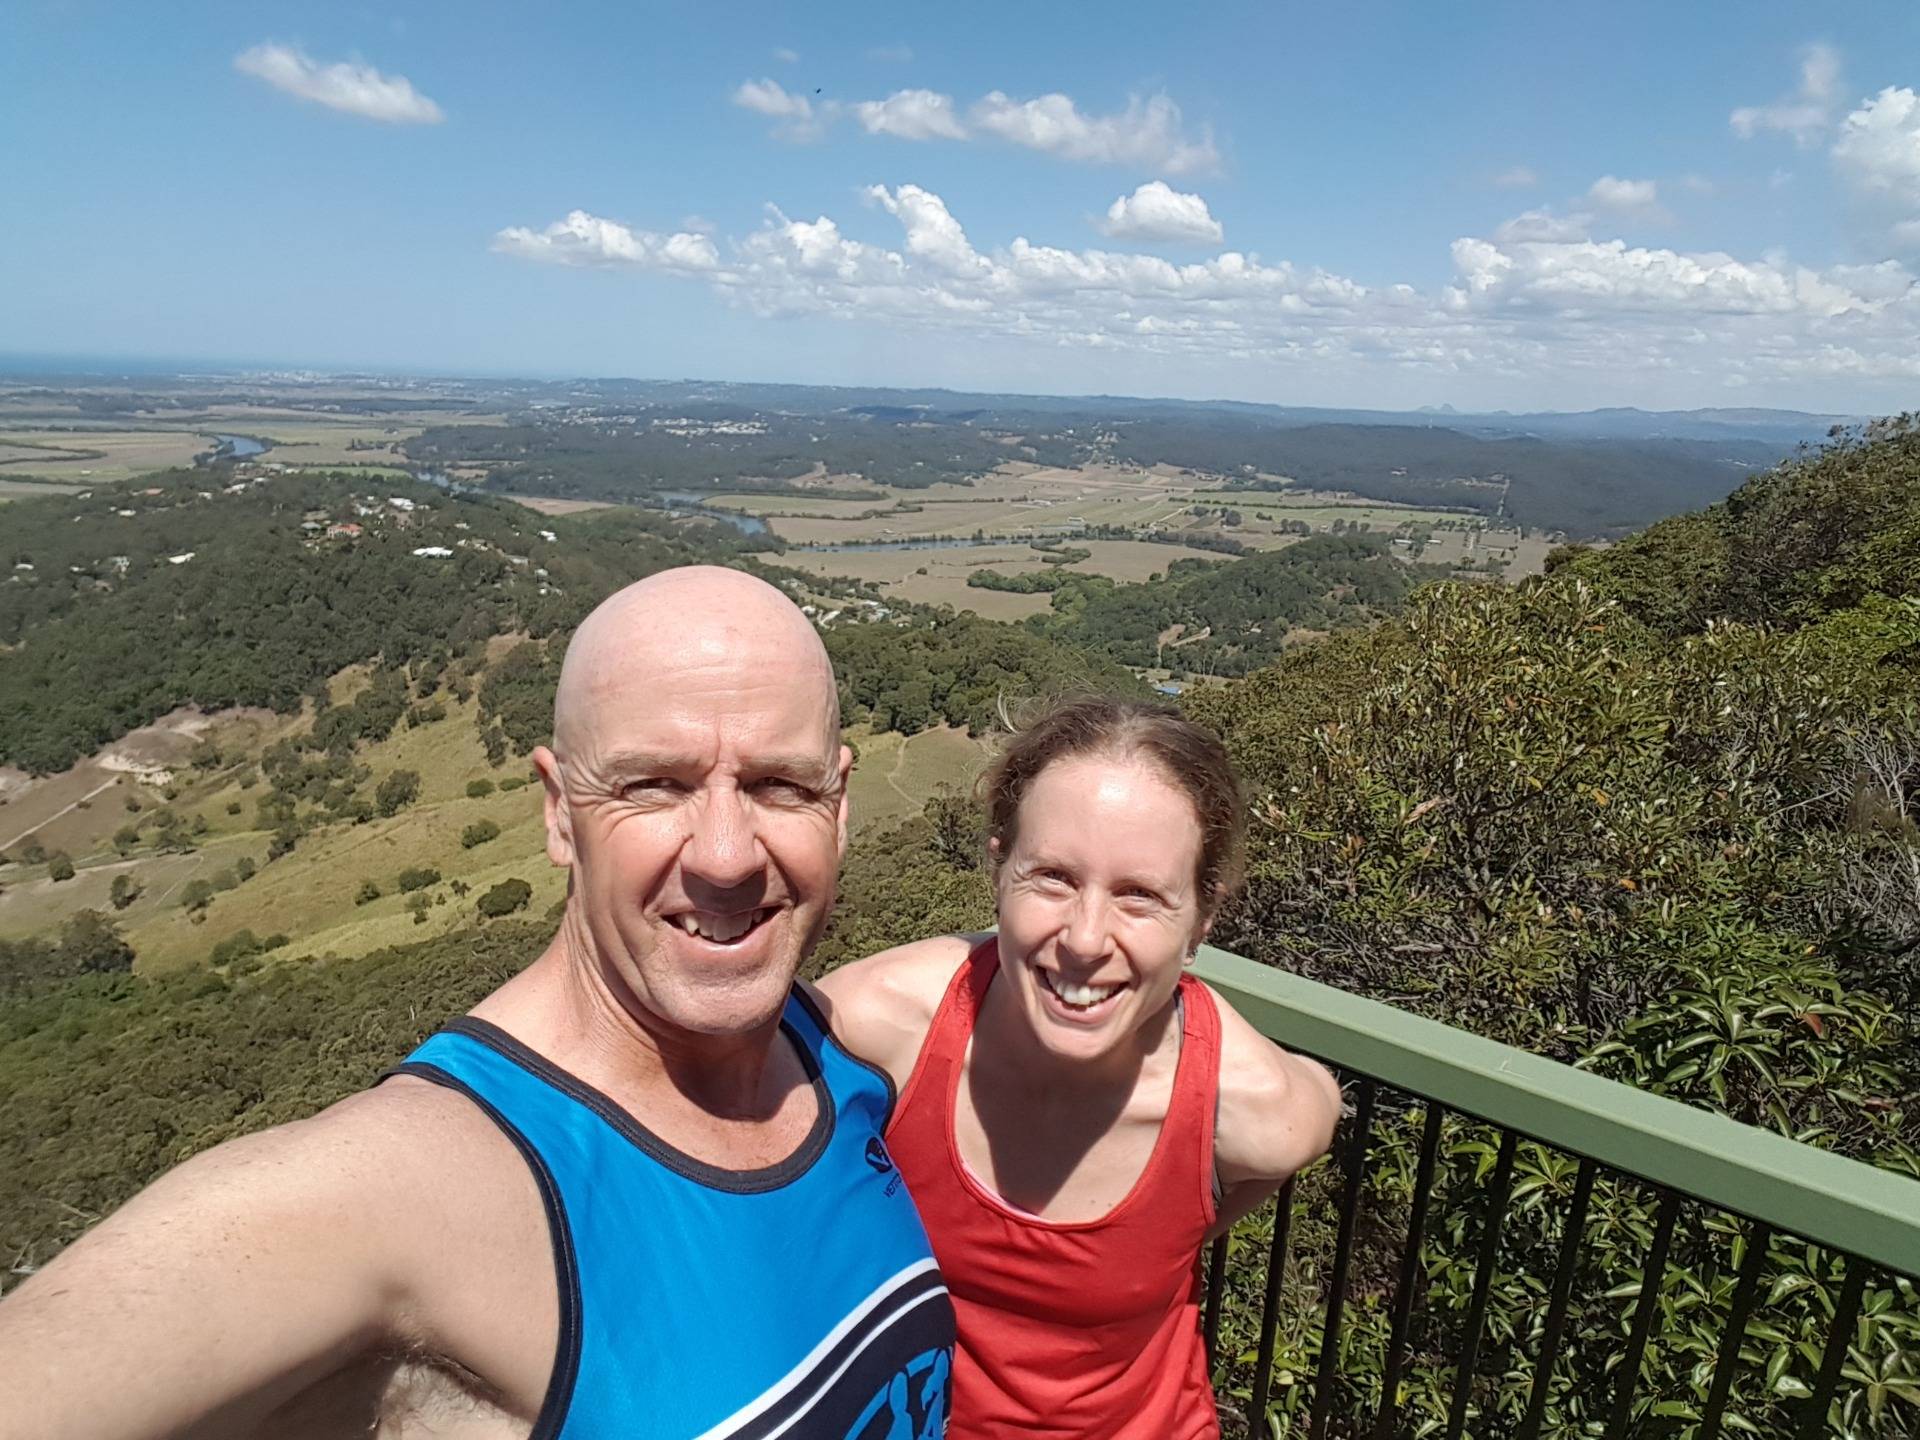 Then, it was onto Mt Ninderry! We did a quick hike up to the gorgeous lookout which is what you can see here.